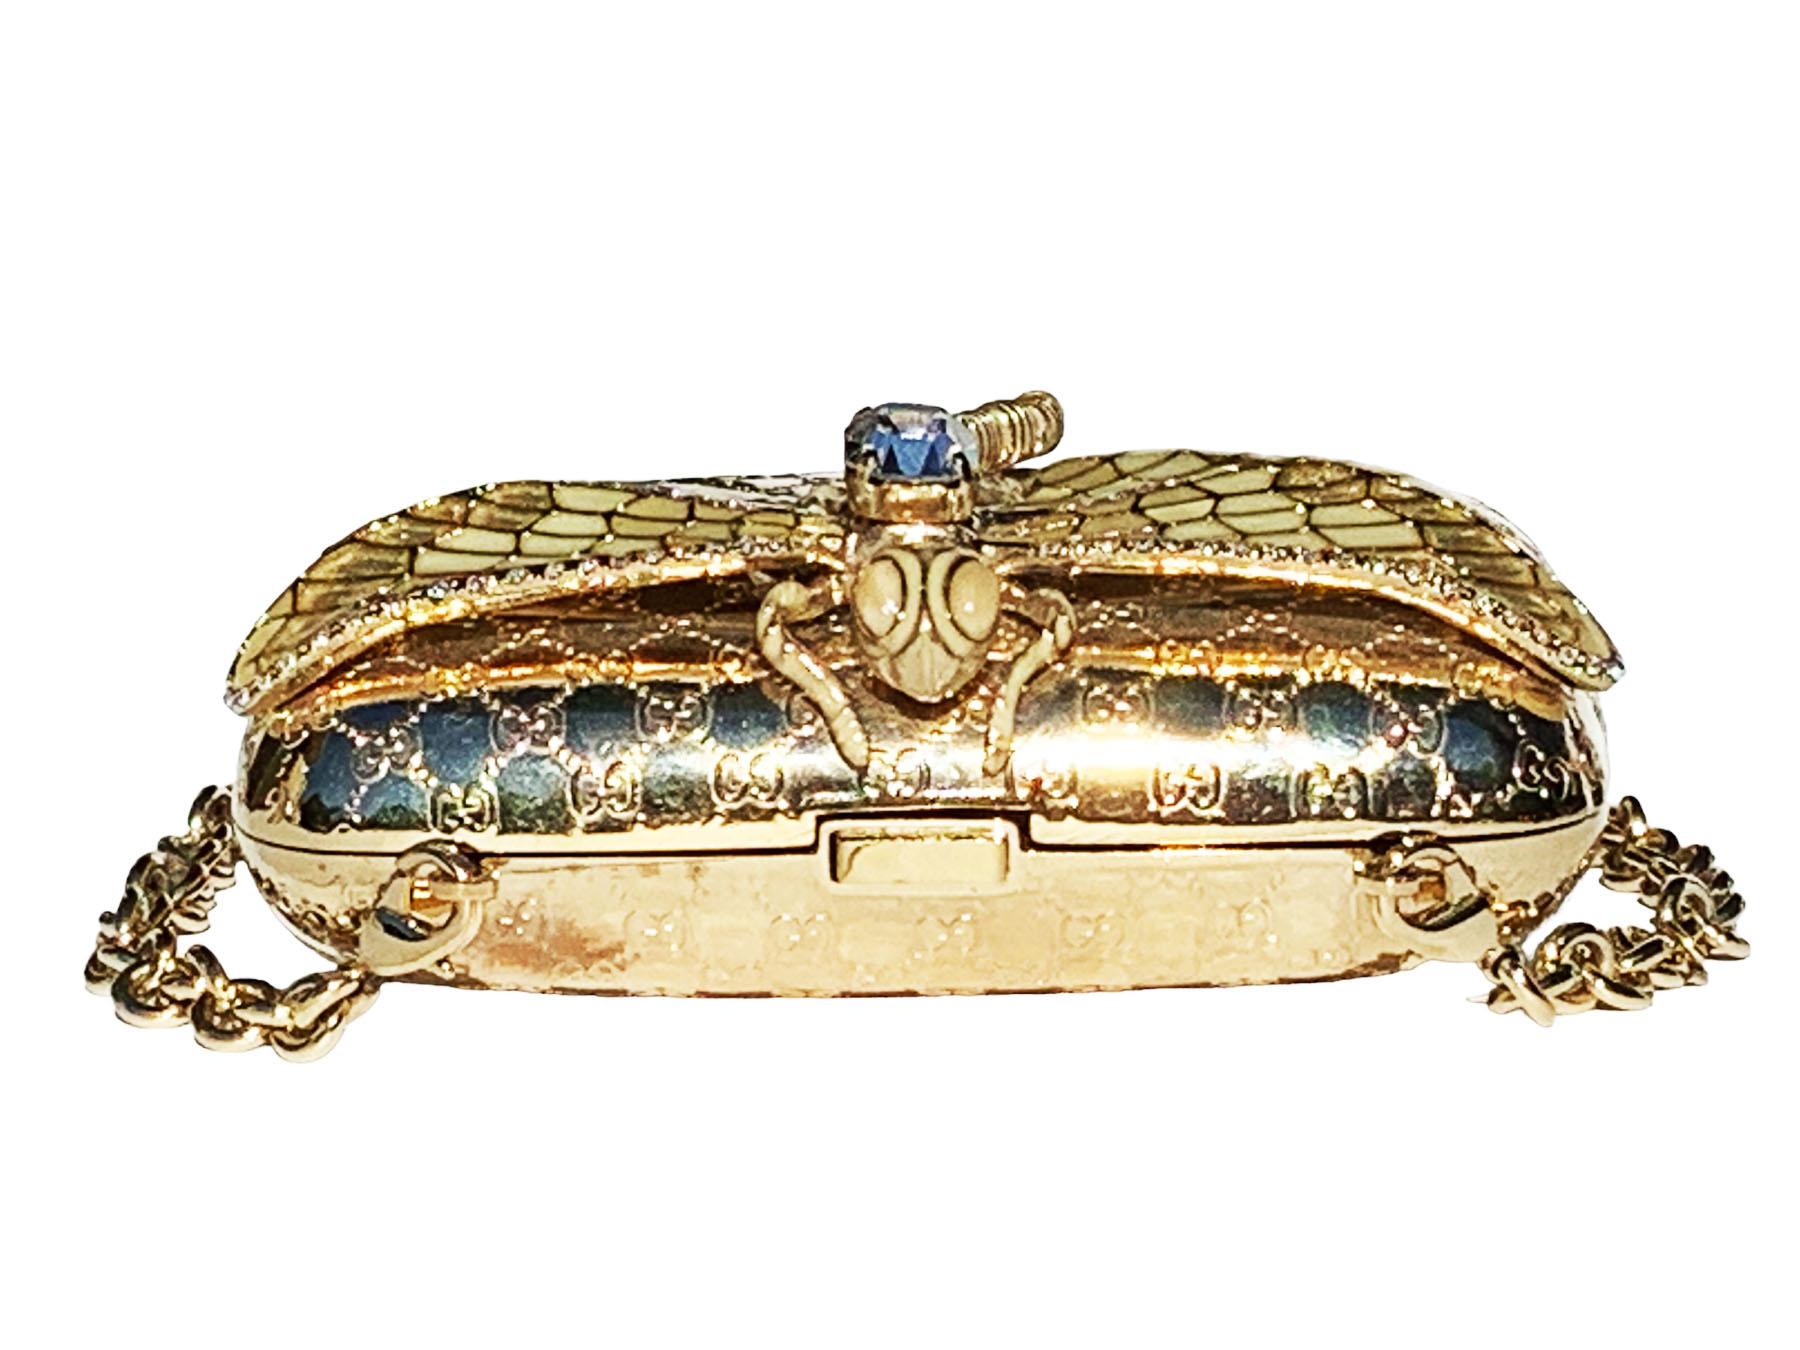 Tom Ford for Gucci Dragonfly Gold Metal MicroGuccissima Enamel Minaudiere Clutch 2